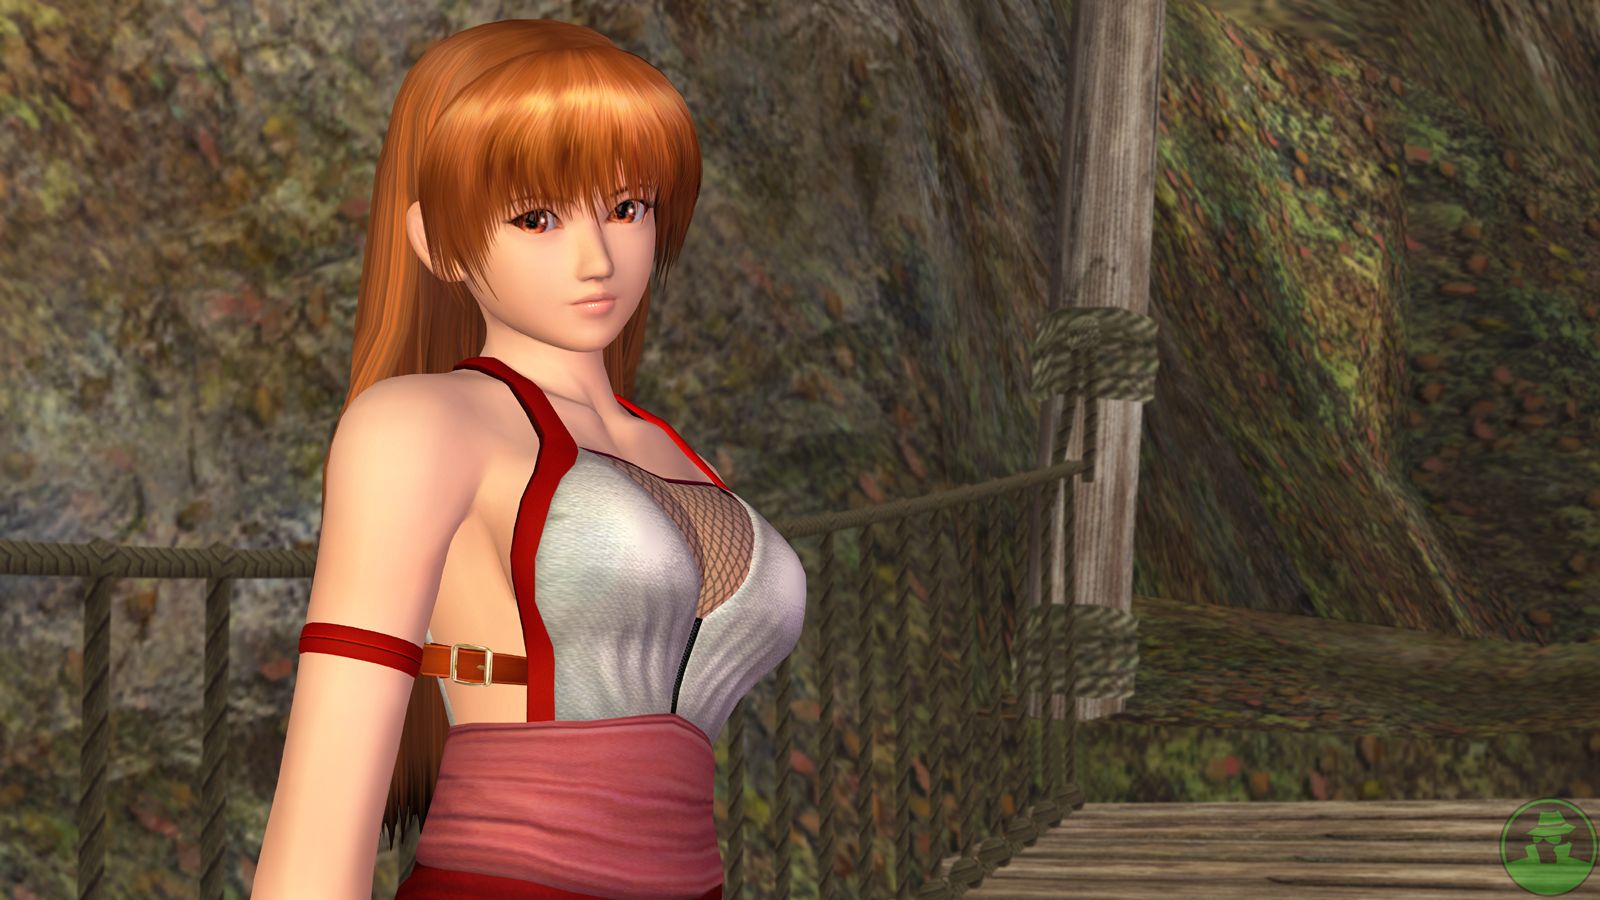 download free dead or alive 5 ultimate